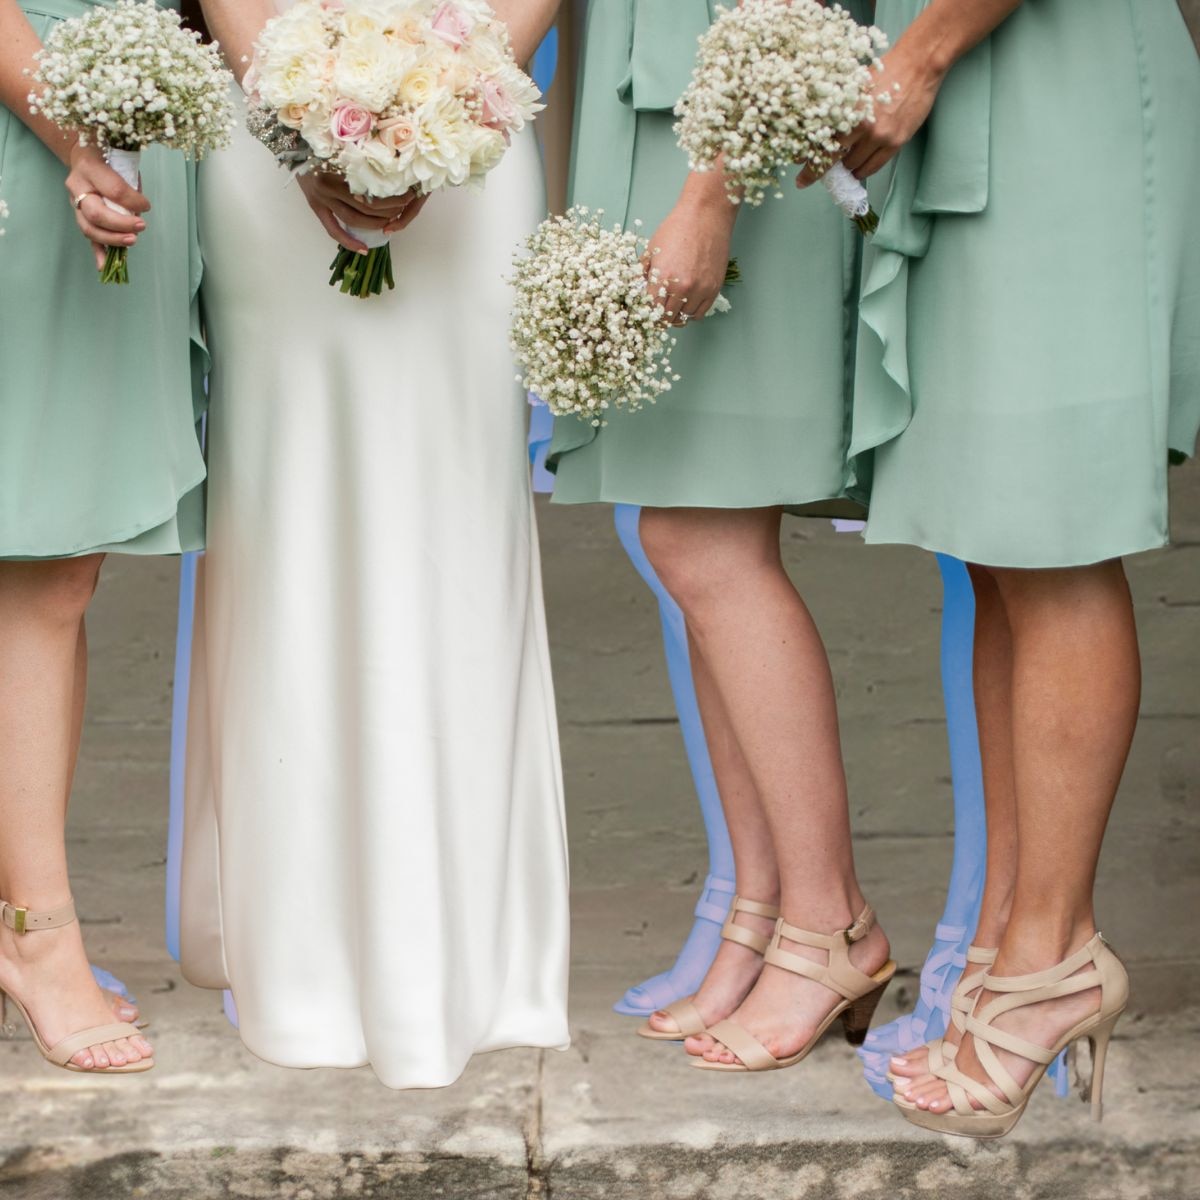 24 Affordable Bridesmaids Gifts They'll Actually Use